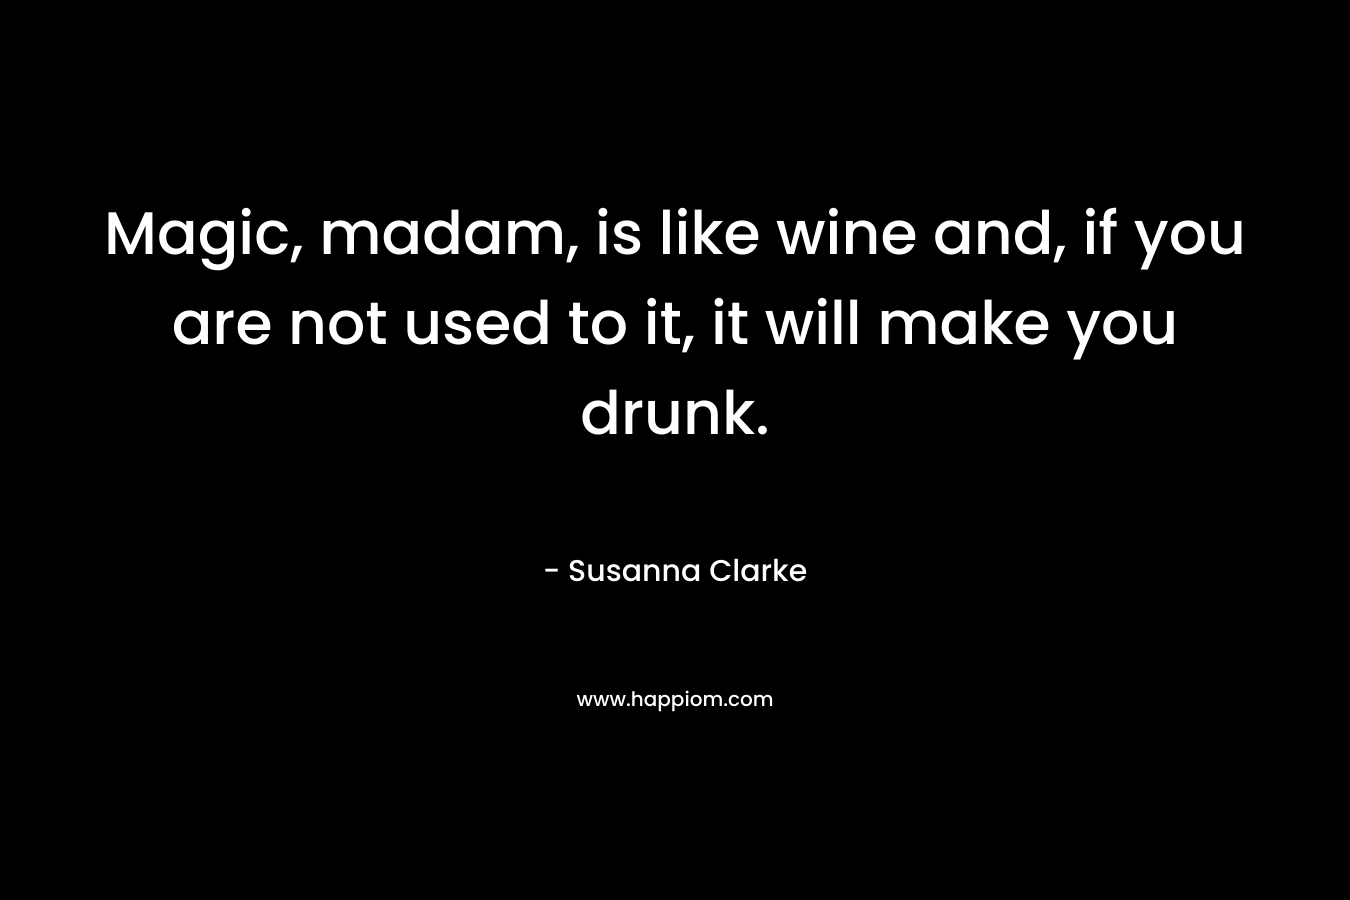 Magic, madam, is like wine and, if you are not used to it, it will make you drunk.